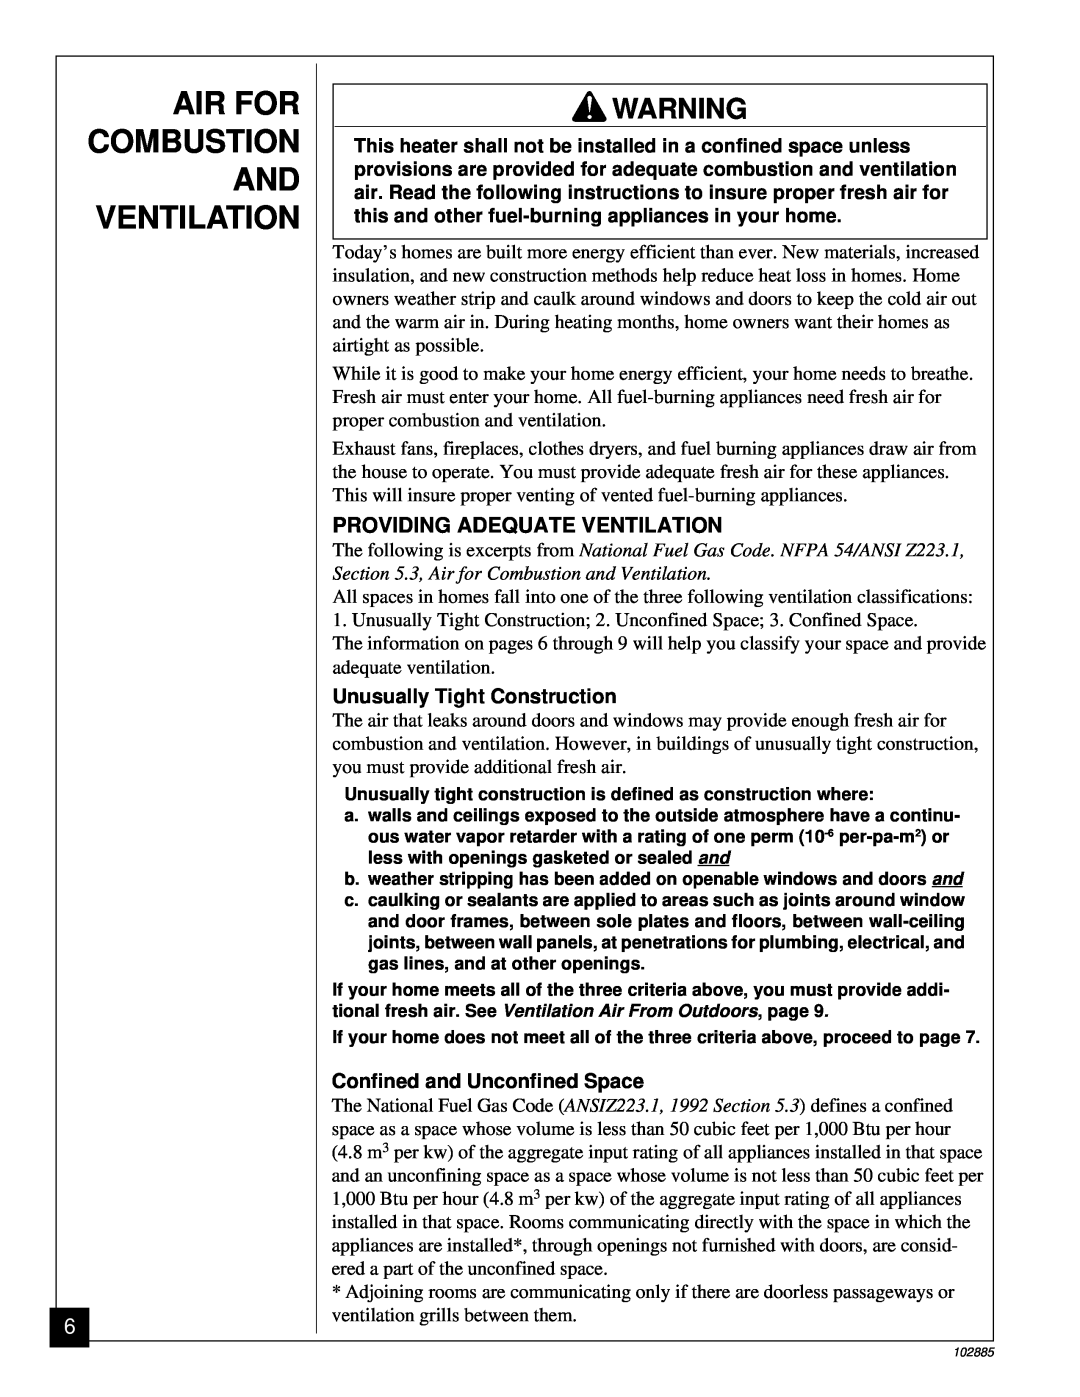 Vanguard Heating VMH26TN installation manual Air For Combustion And Ventilation, Providing Adequate Ventilation 